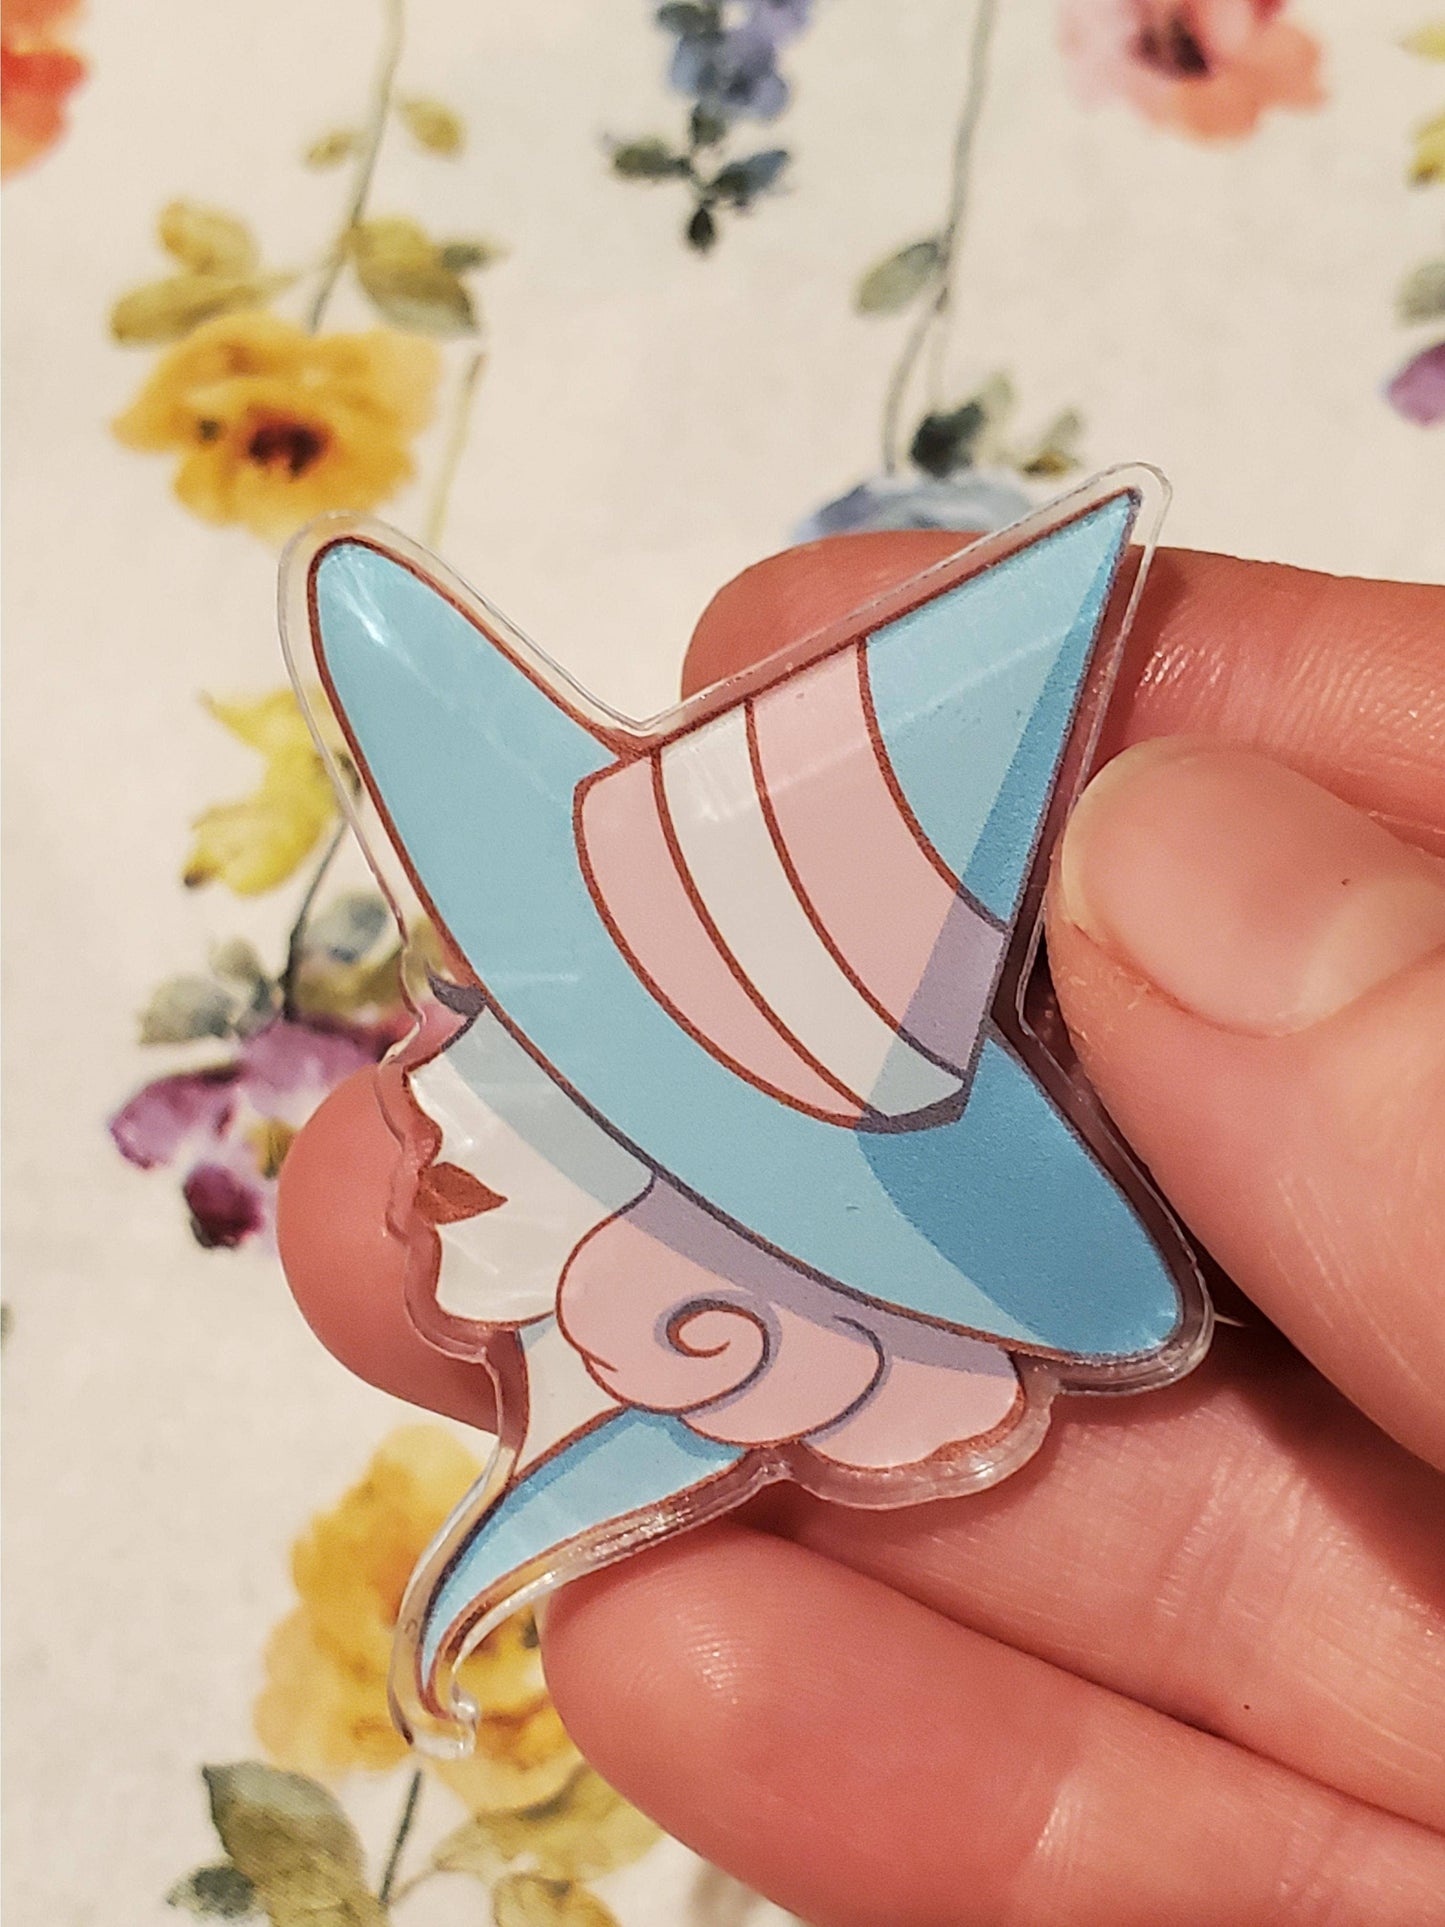 Pride Witches - Acrylic Pins: Bisexual